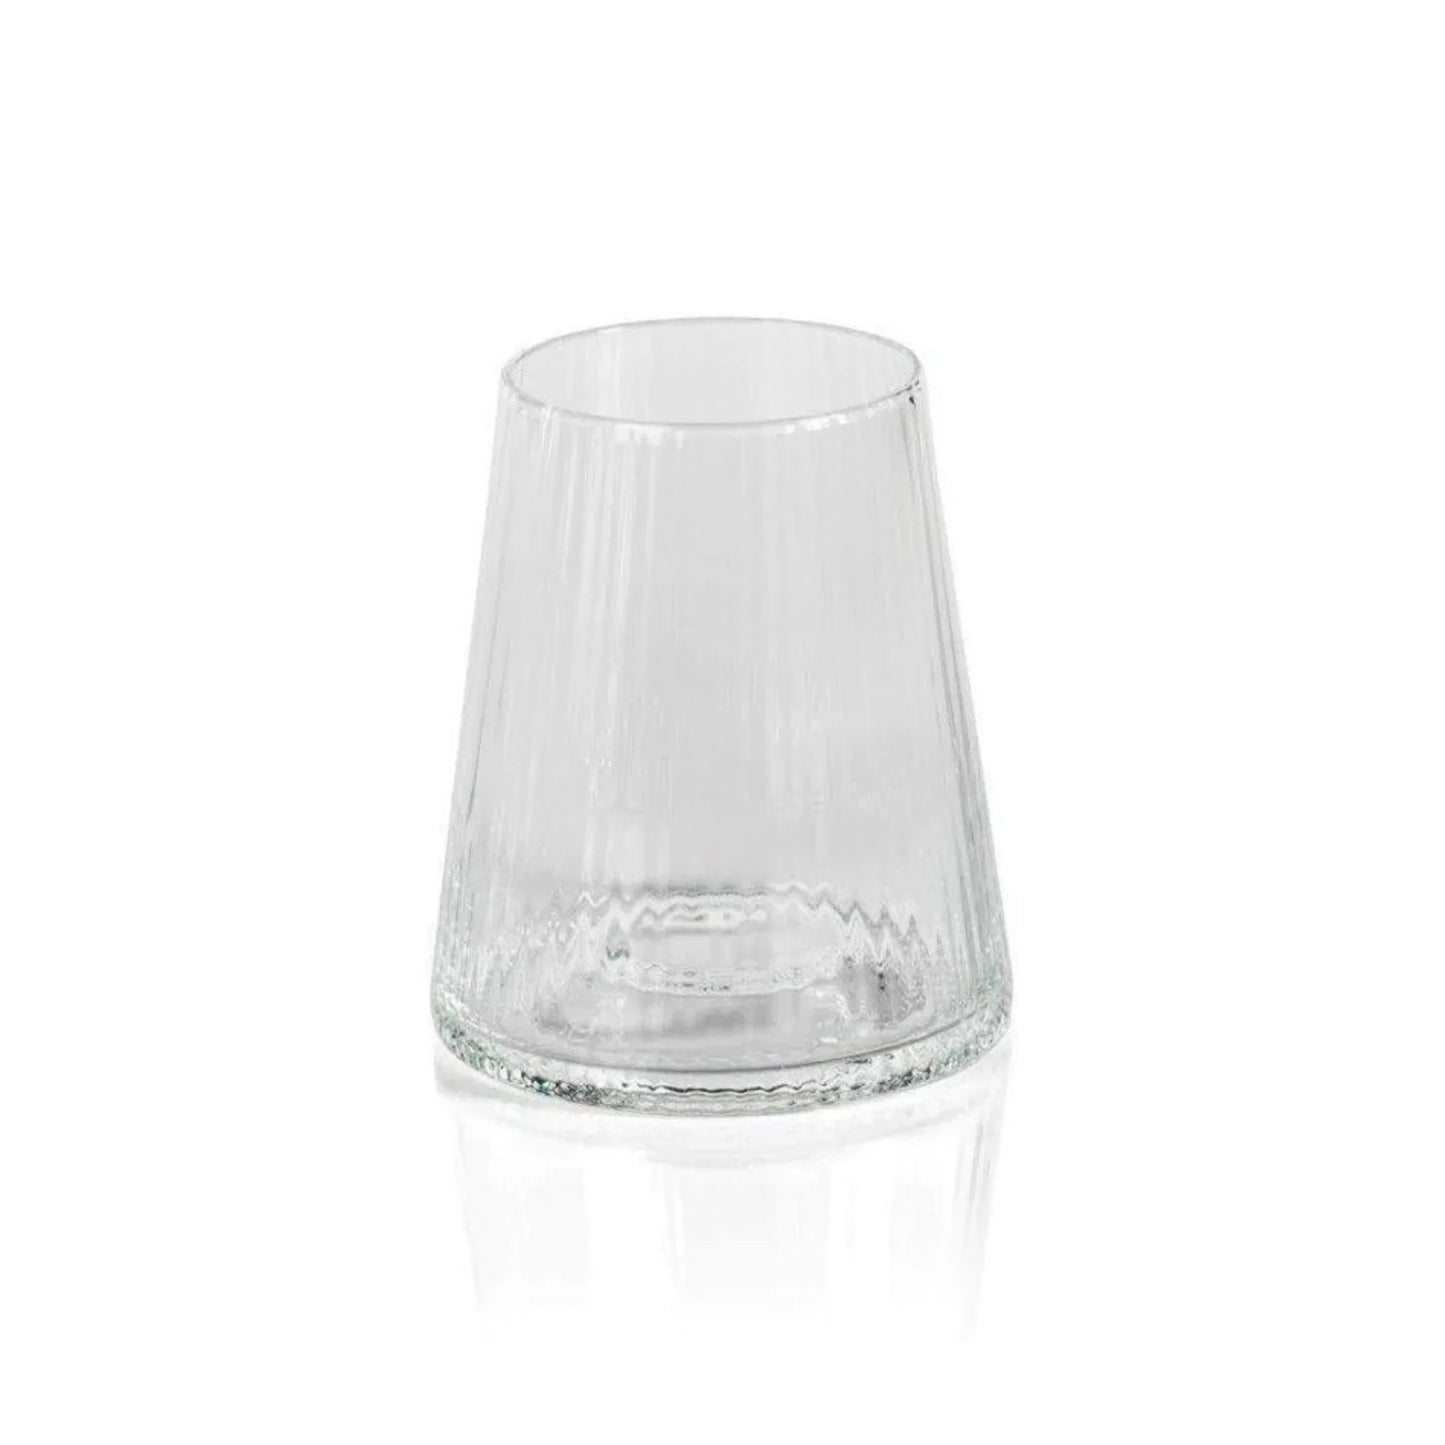 REED STEMLESS GLASS